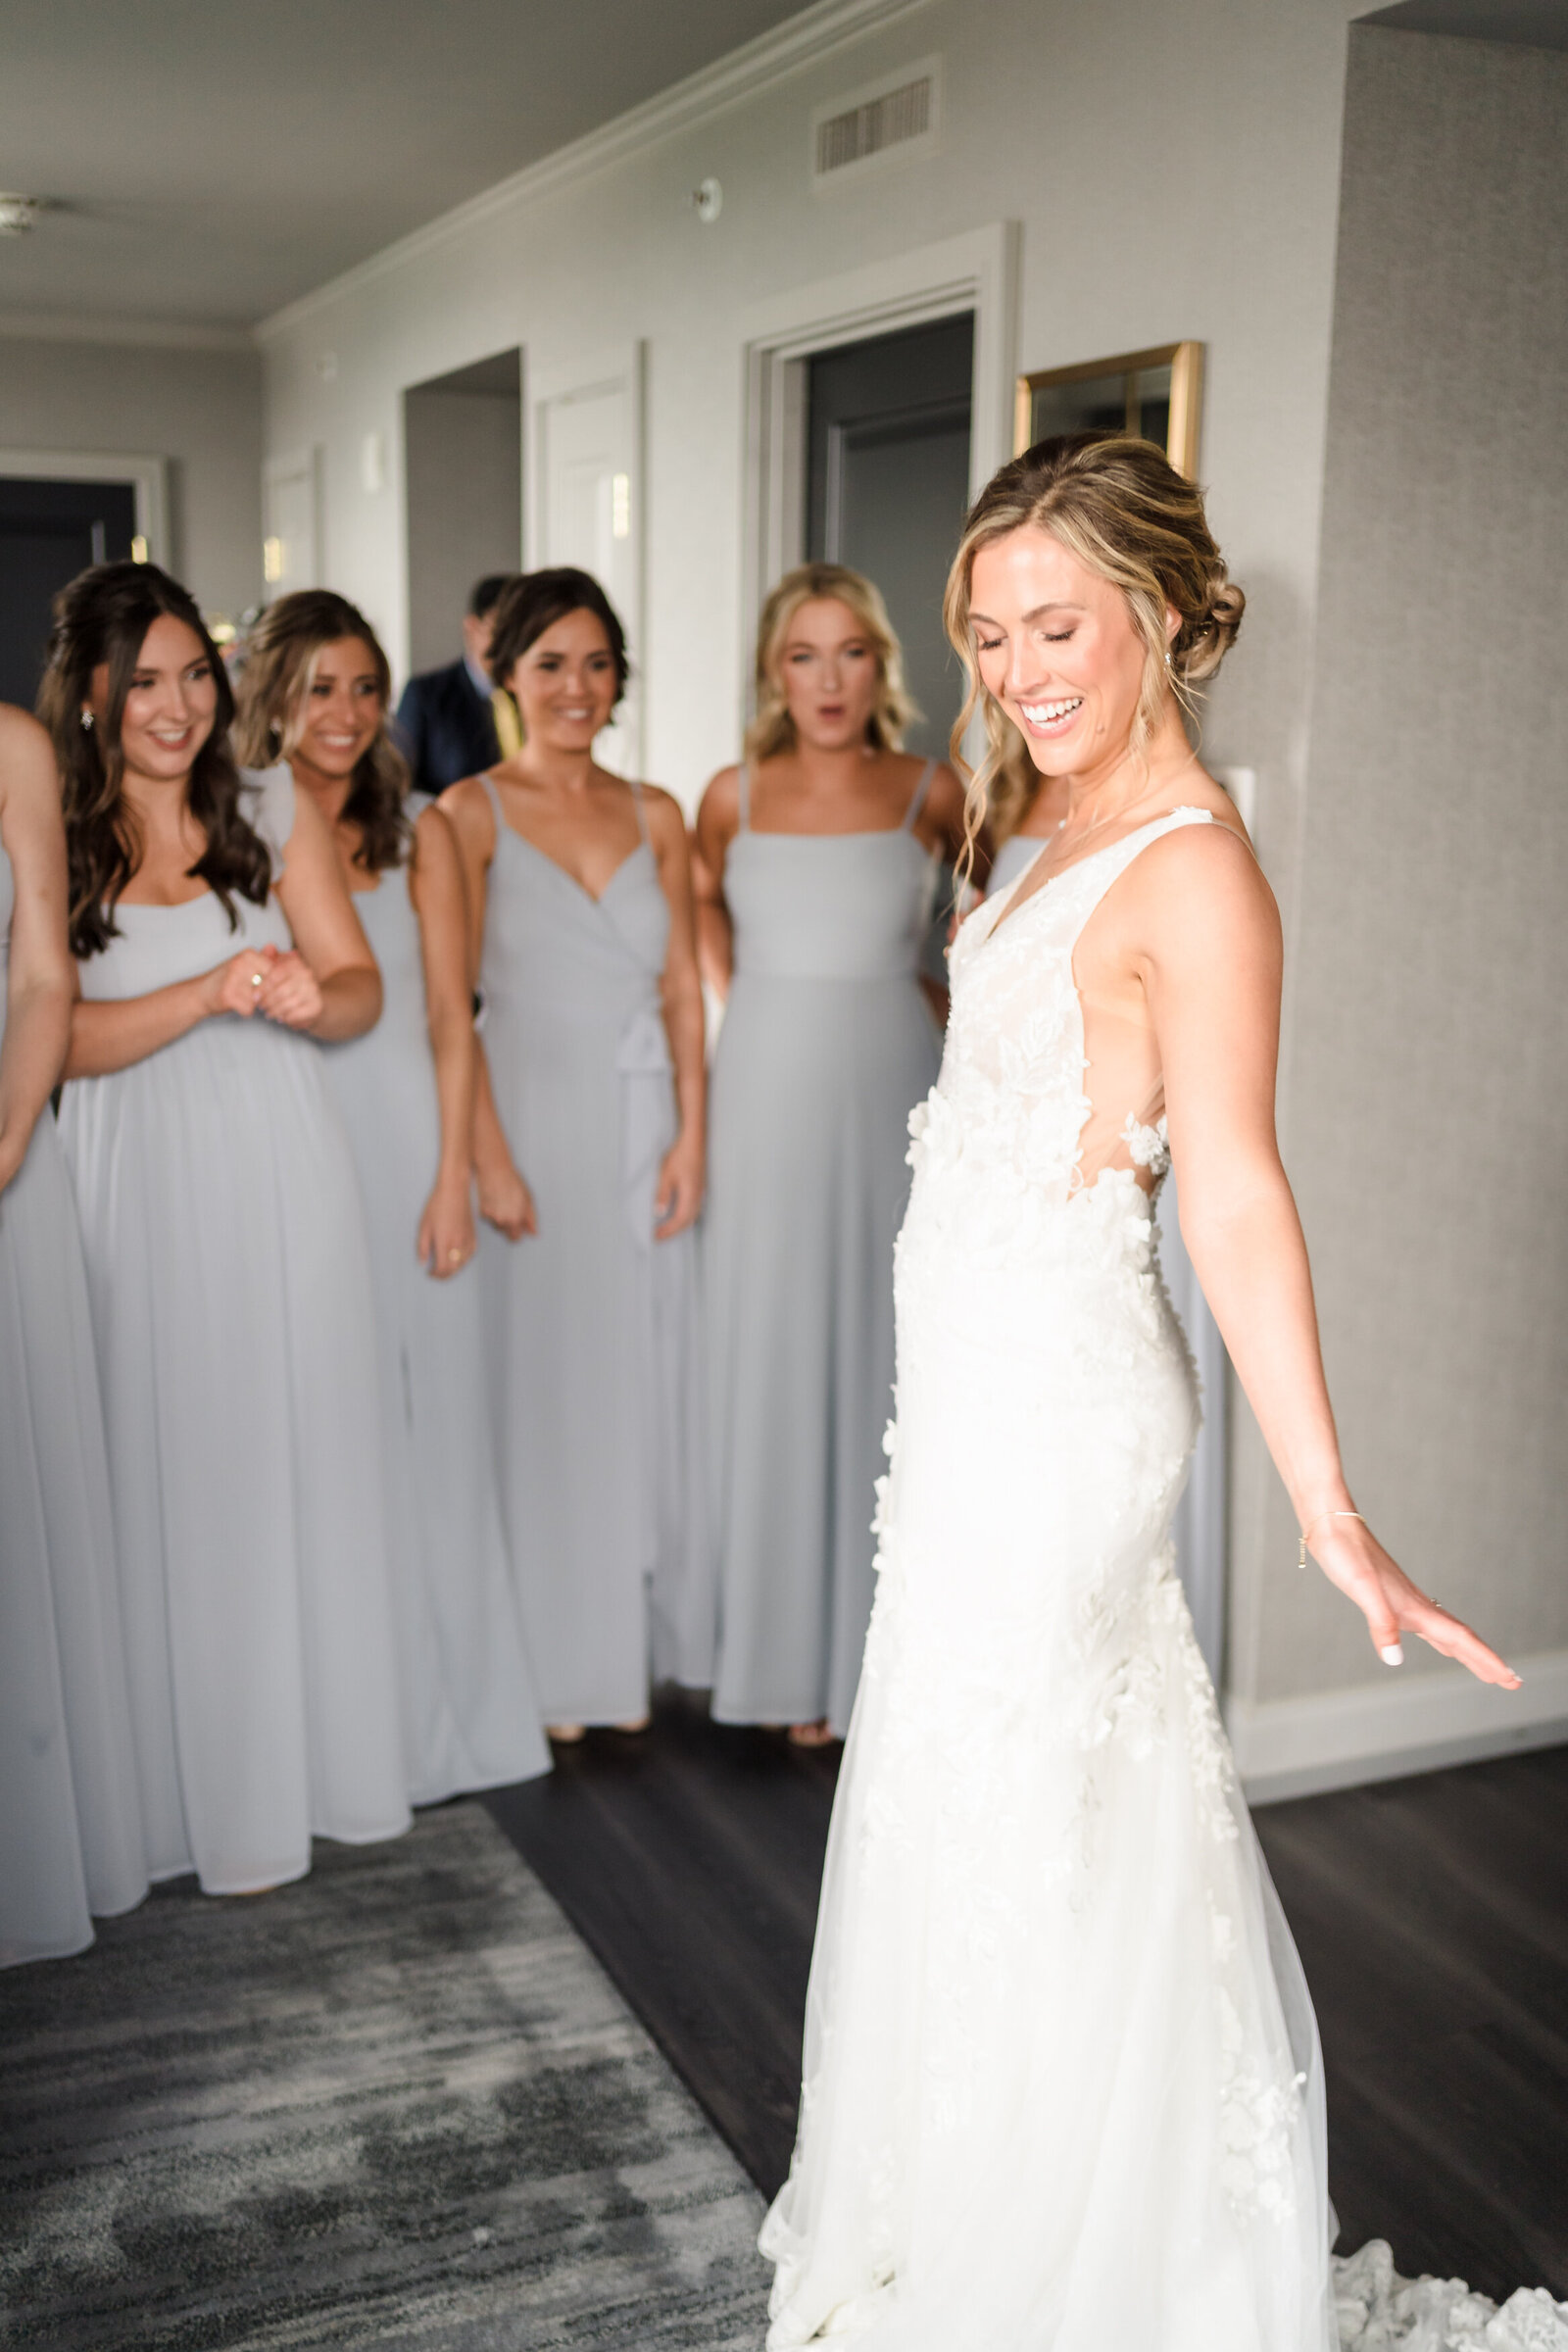 A bride shows off her wedding dress to her bridesmaids inside the suit at the LeVeque Tower